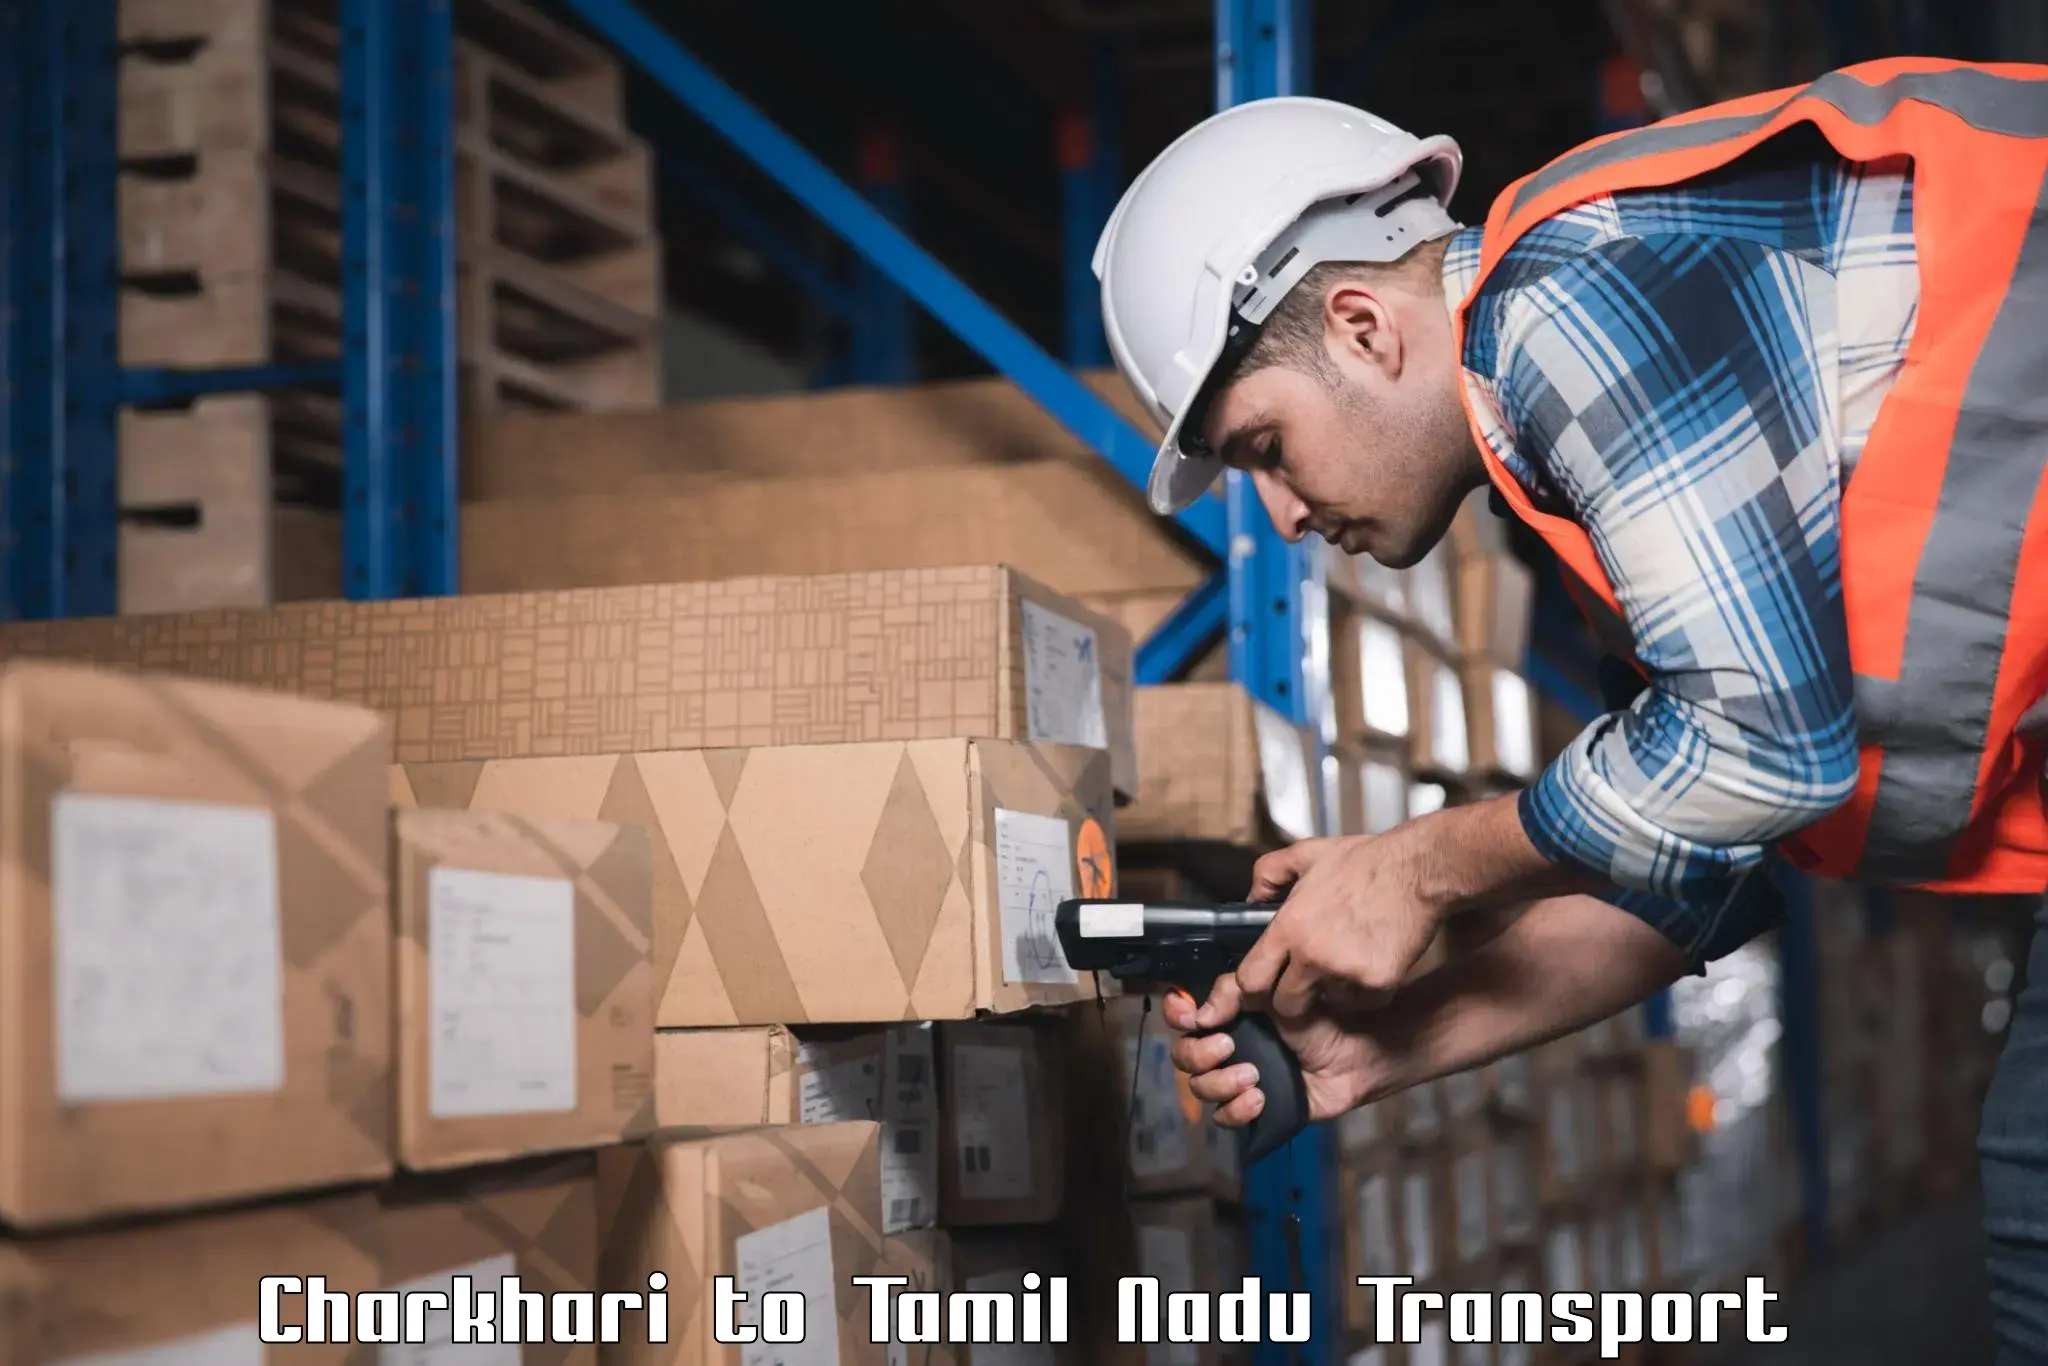 Container transport service Charkhari to Tamil Nadu